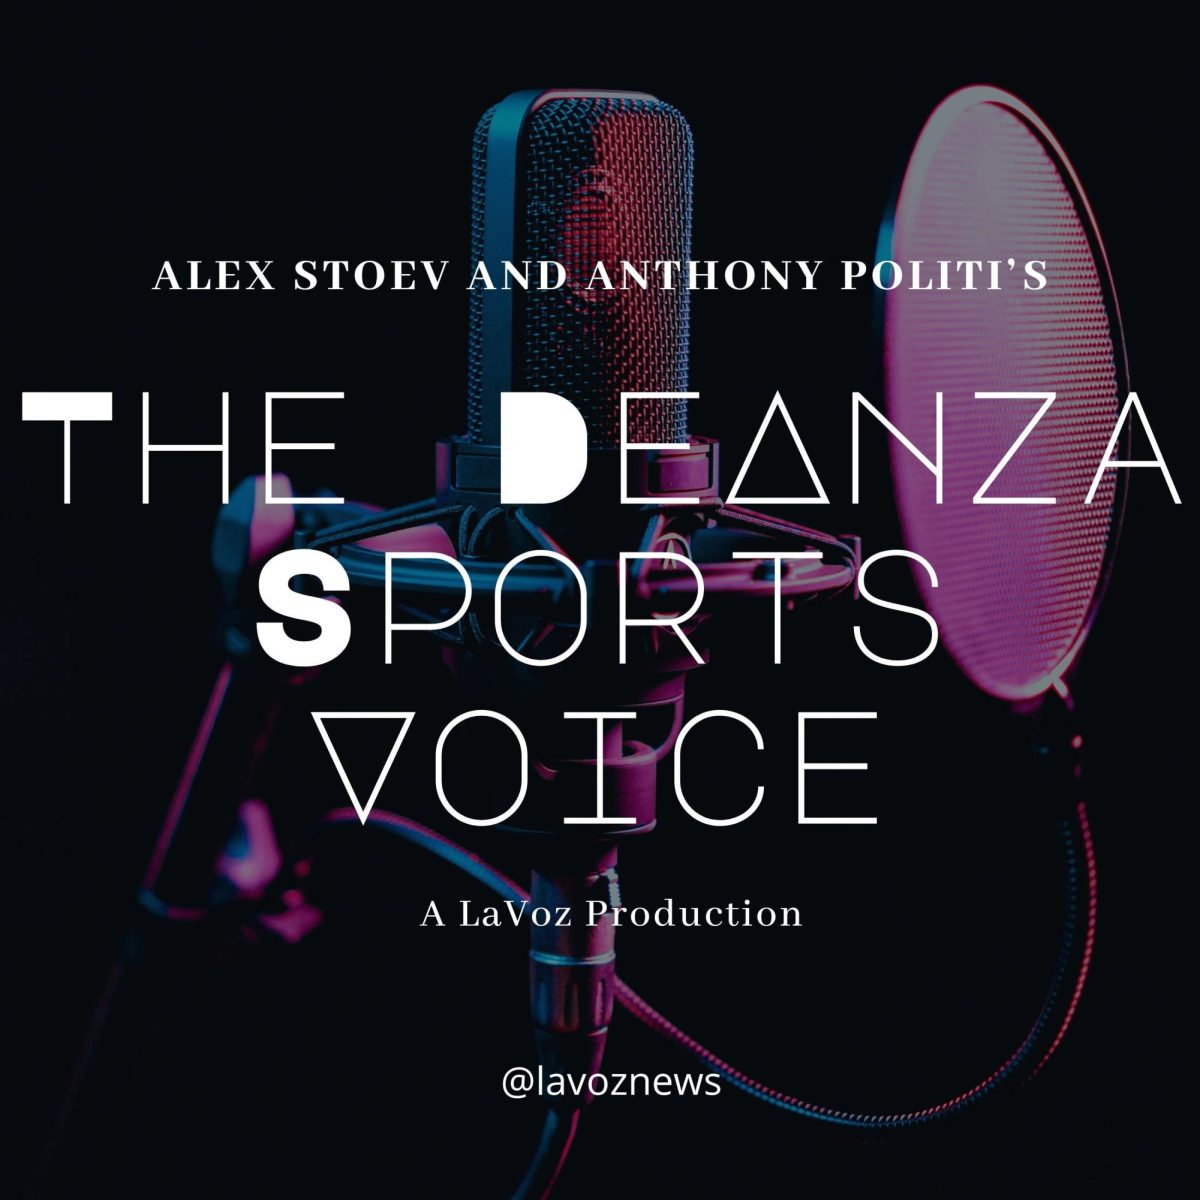 Graphic+for+the+podcast+The+De+Anza+Sports+Voice%2C+hosted+by+Alexander+Stoev+and+Anthony+Politi.